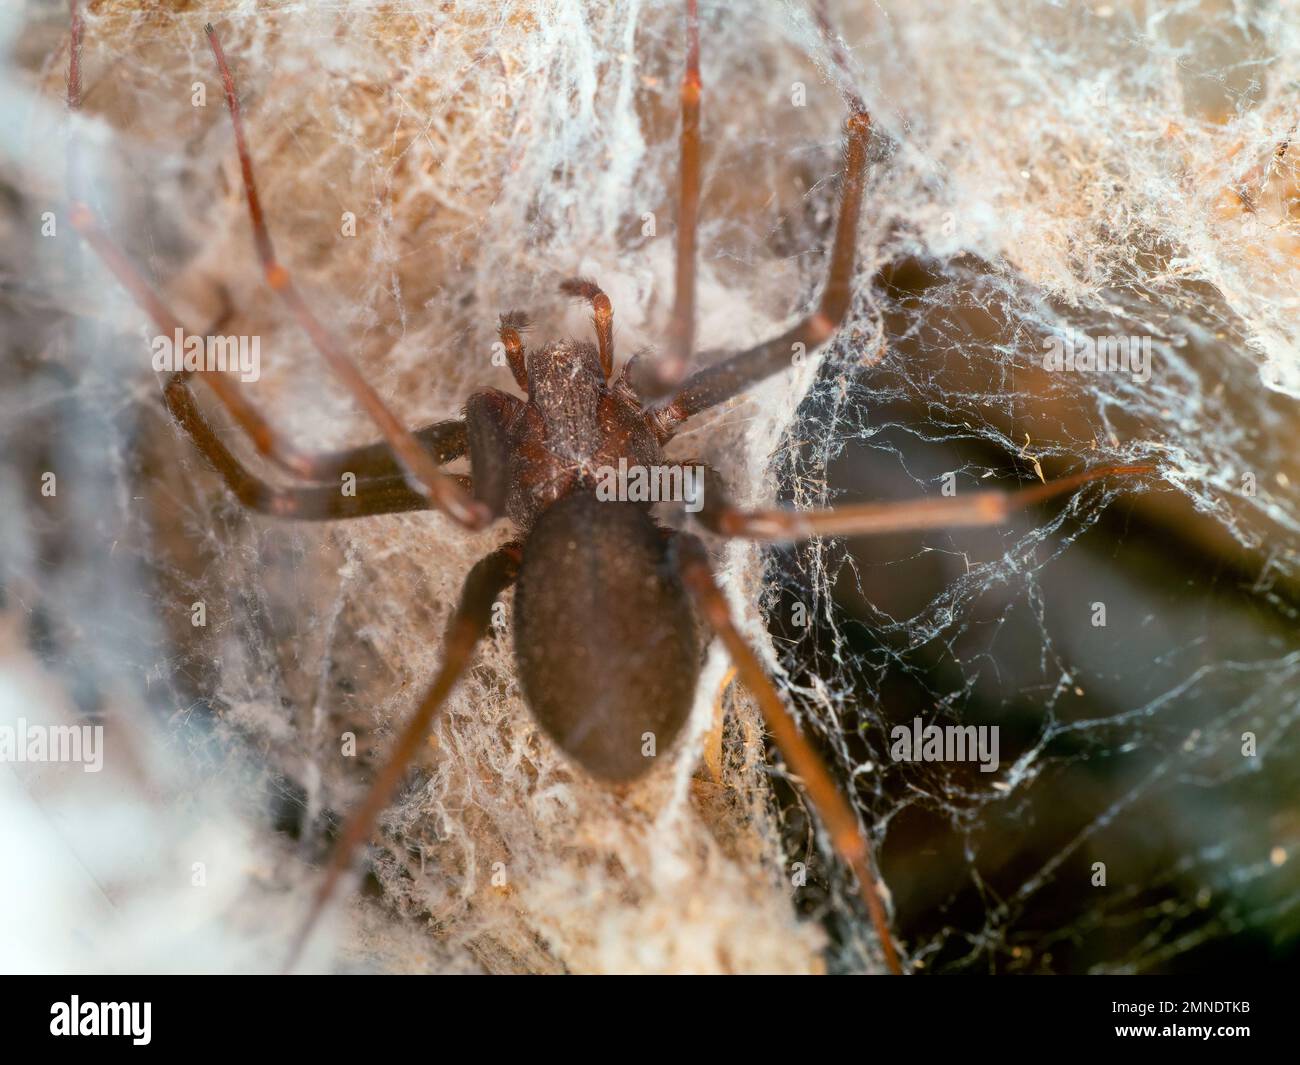 Details of a Loxosceles spider (Brown recluse) viewed from above, also known as aranha marrom, venomous species Stock Photo